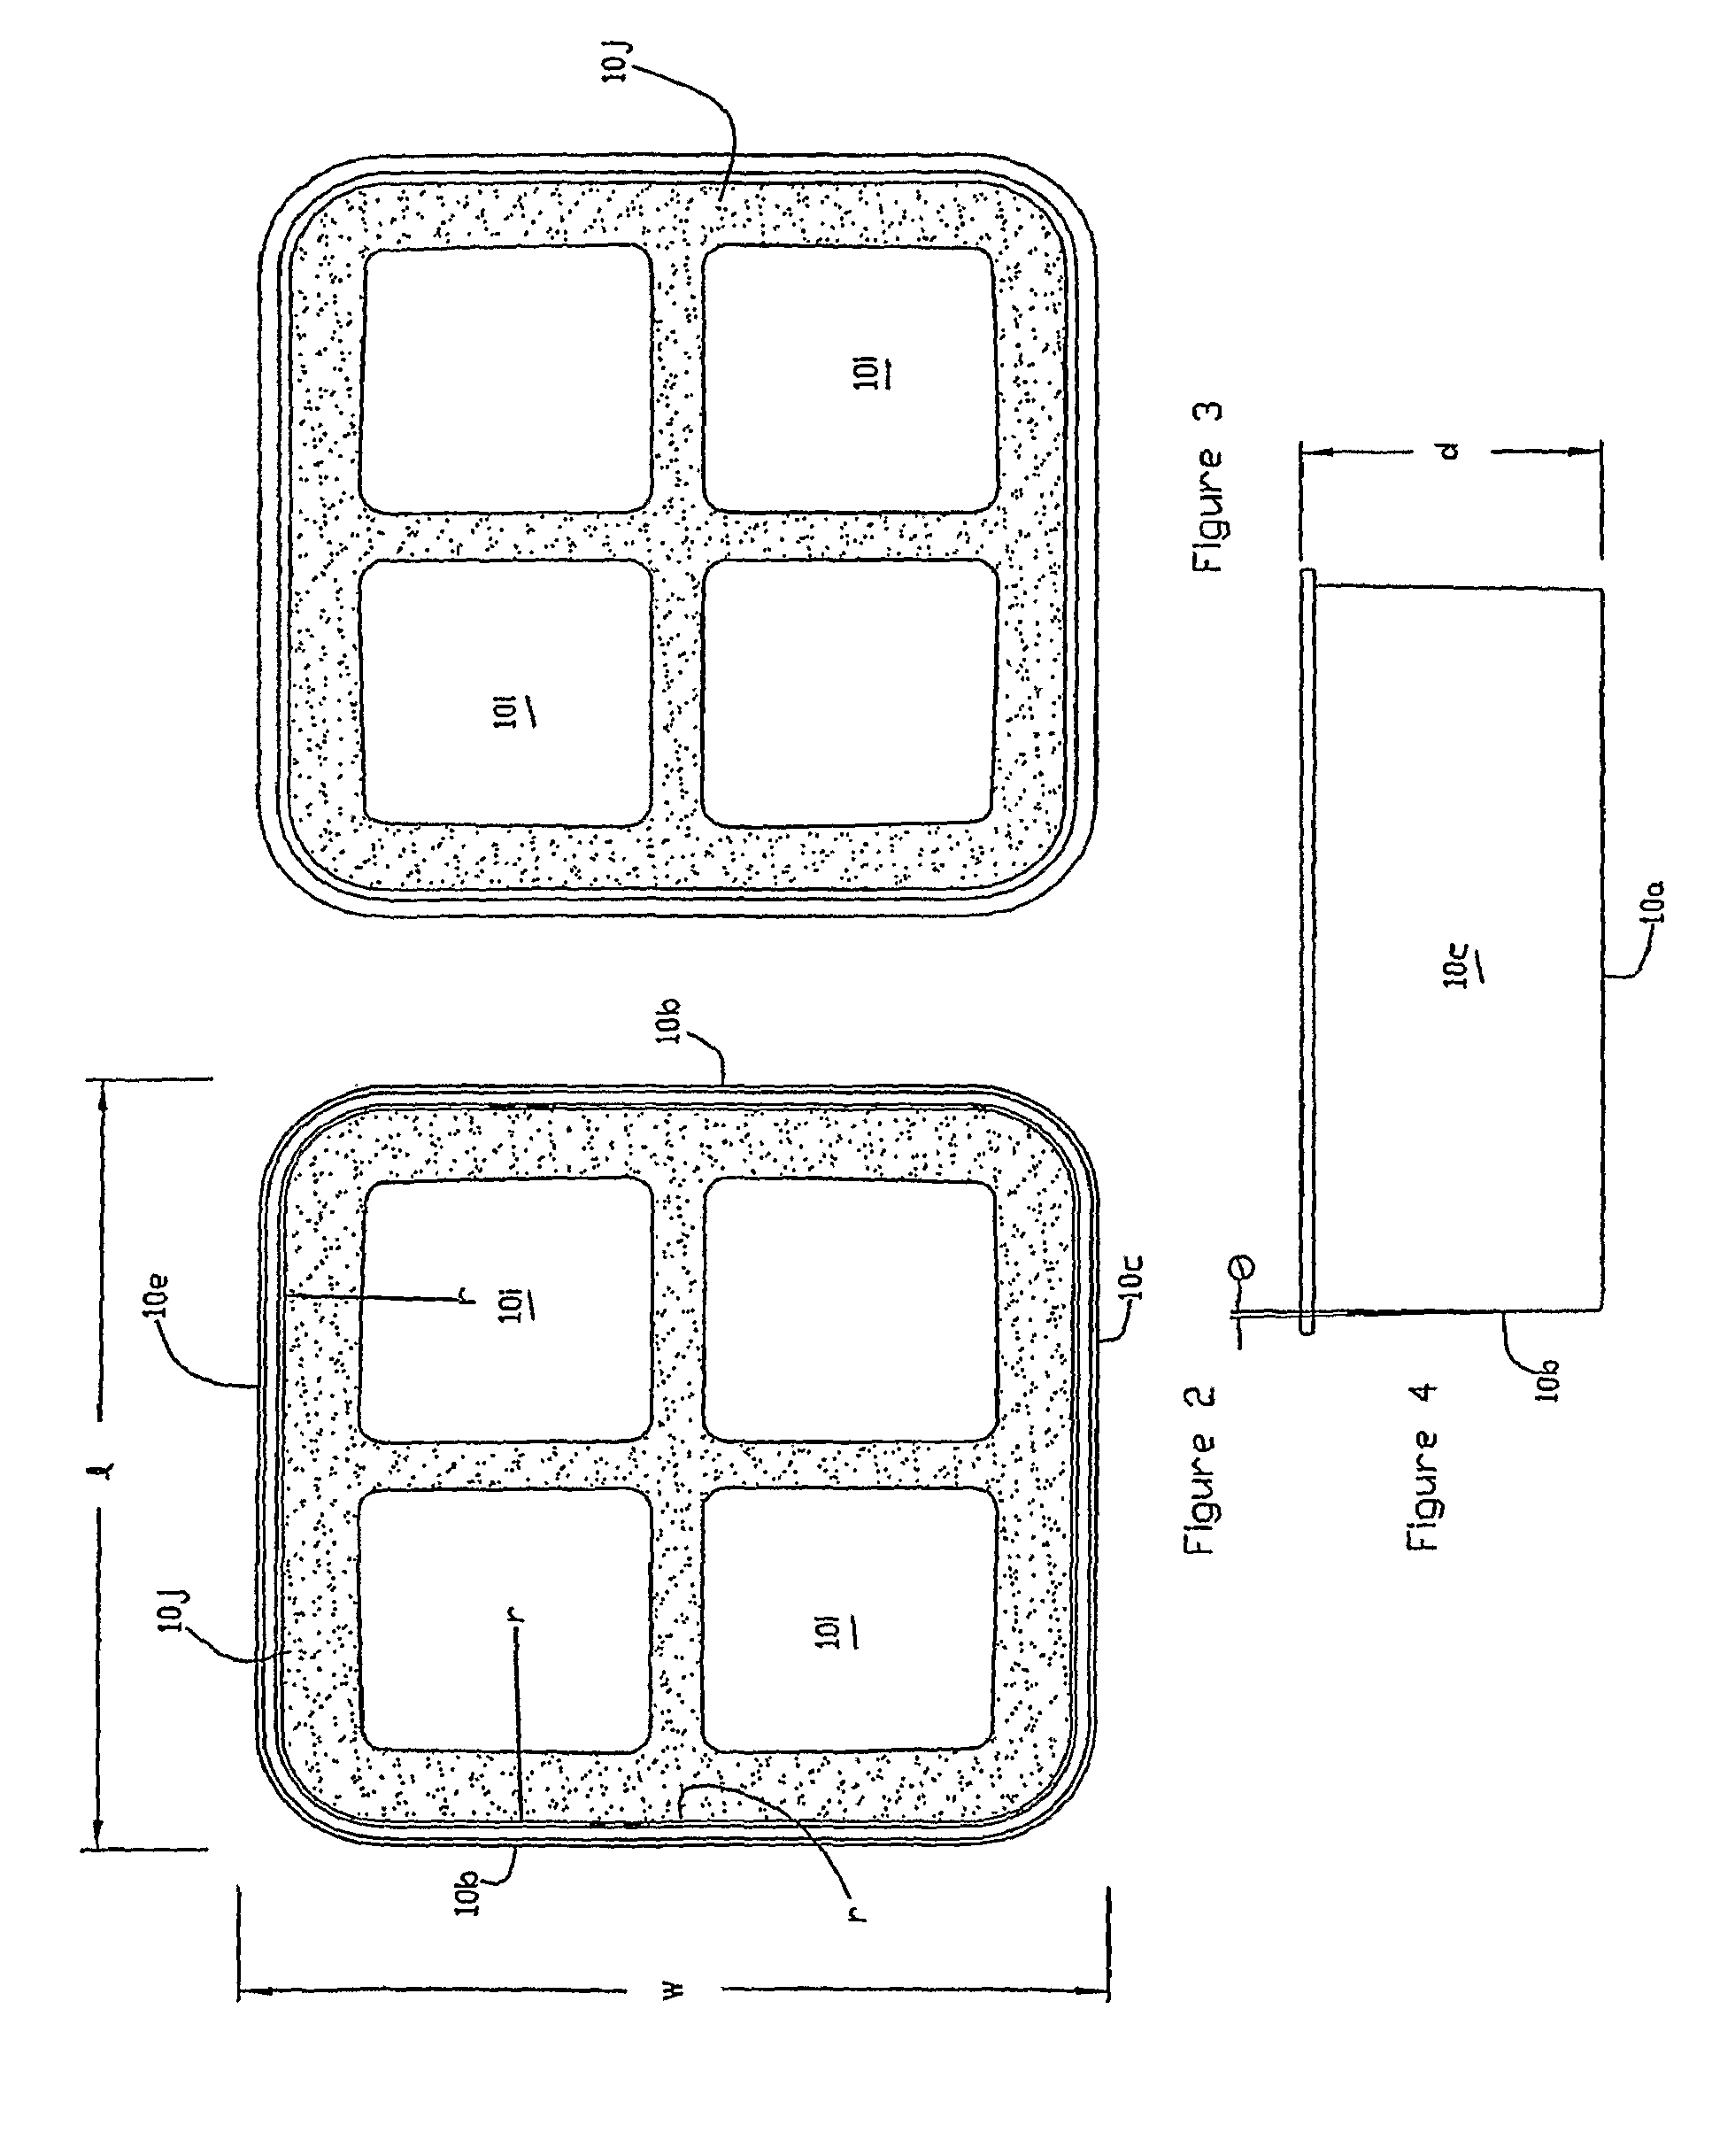 Container/Lid Combination For Storing Food and other Articles